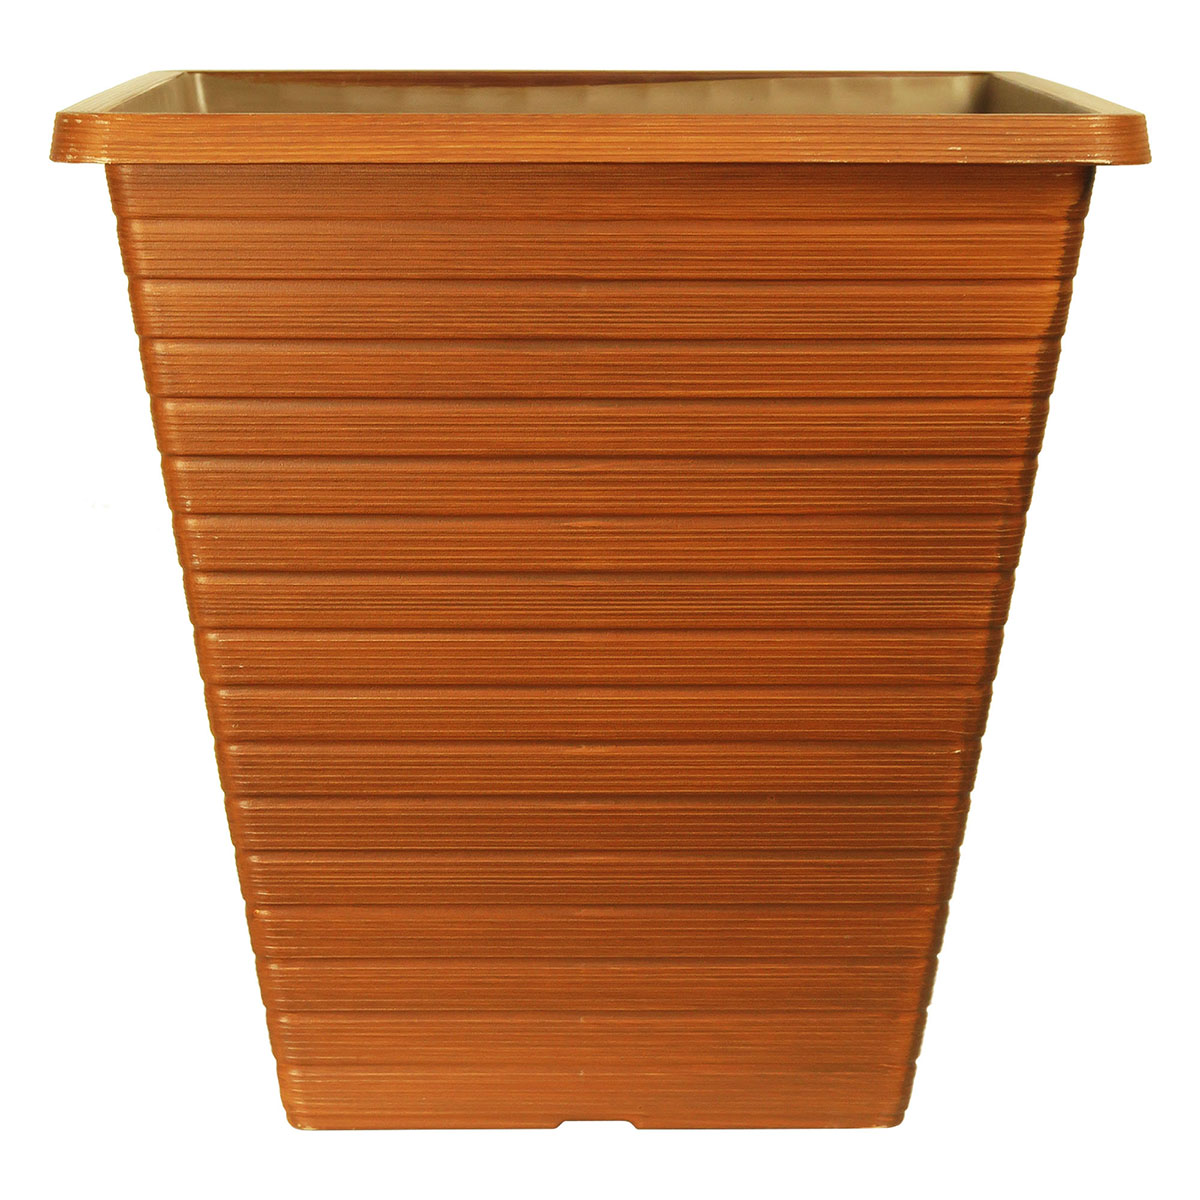 14 Inch Evans Tall Square Planter Caramel Wood - 17 per case